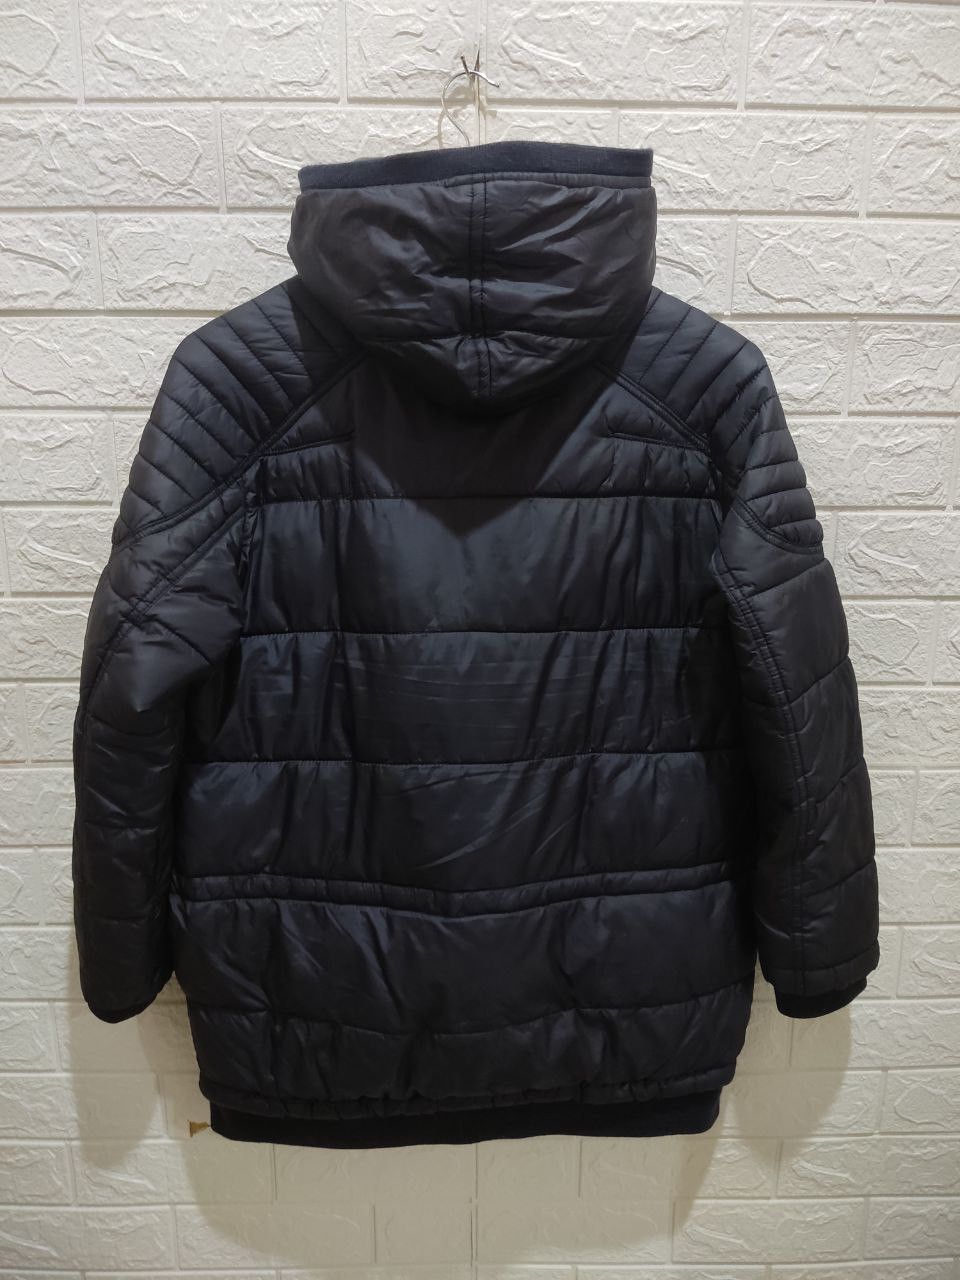 Archival Clothing - Codes Combine Hooded Puffer Down Jacket - 3